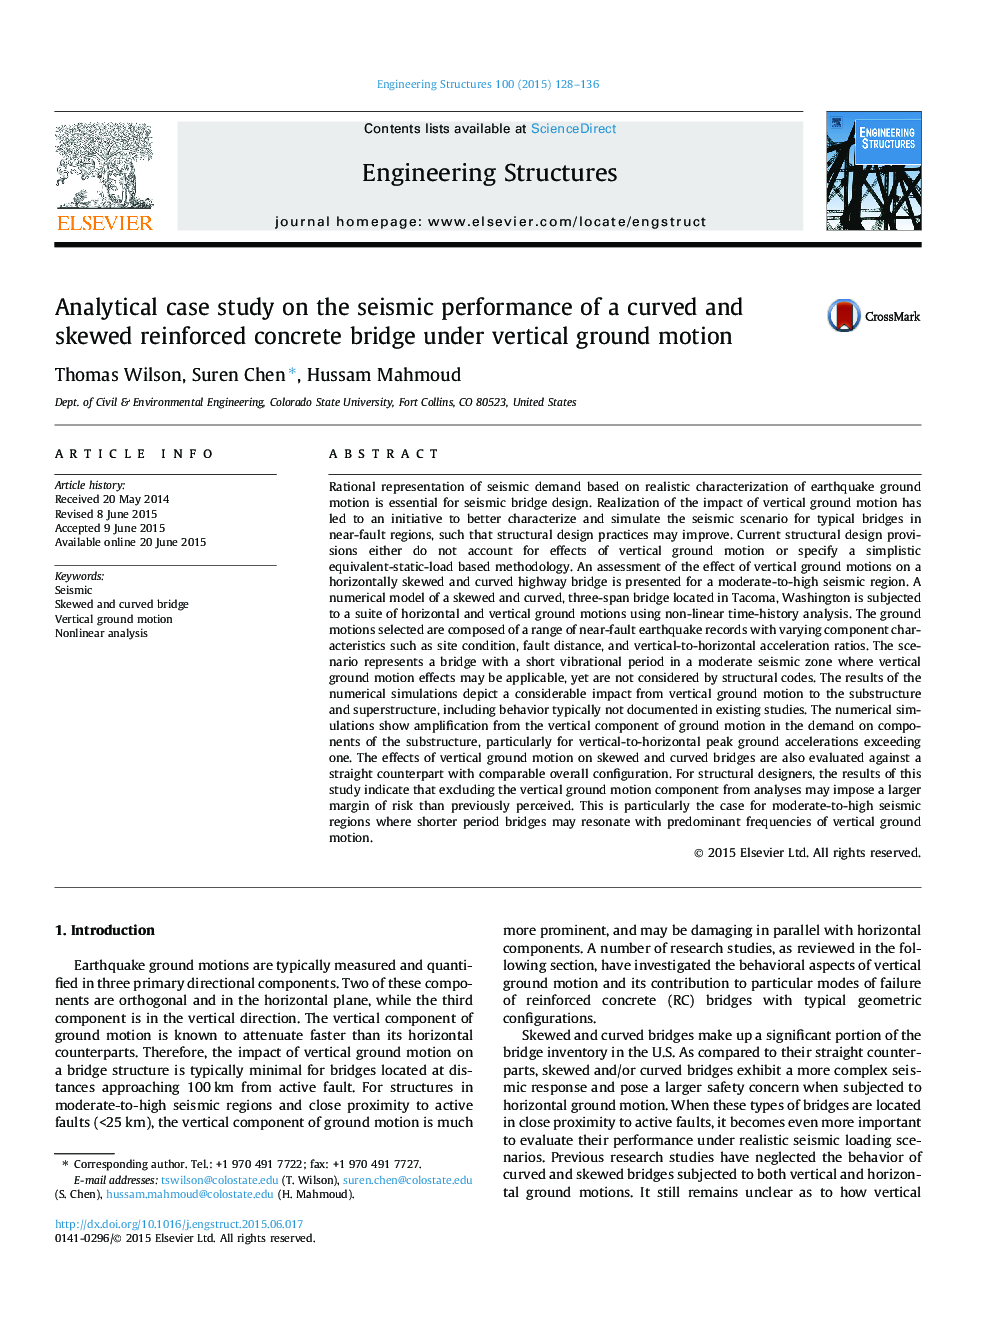 Analytical case study on the seismic performance of a curved and skewed reinforced concrete bridge under vertical ground motion